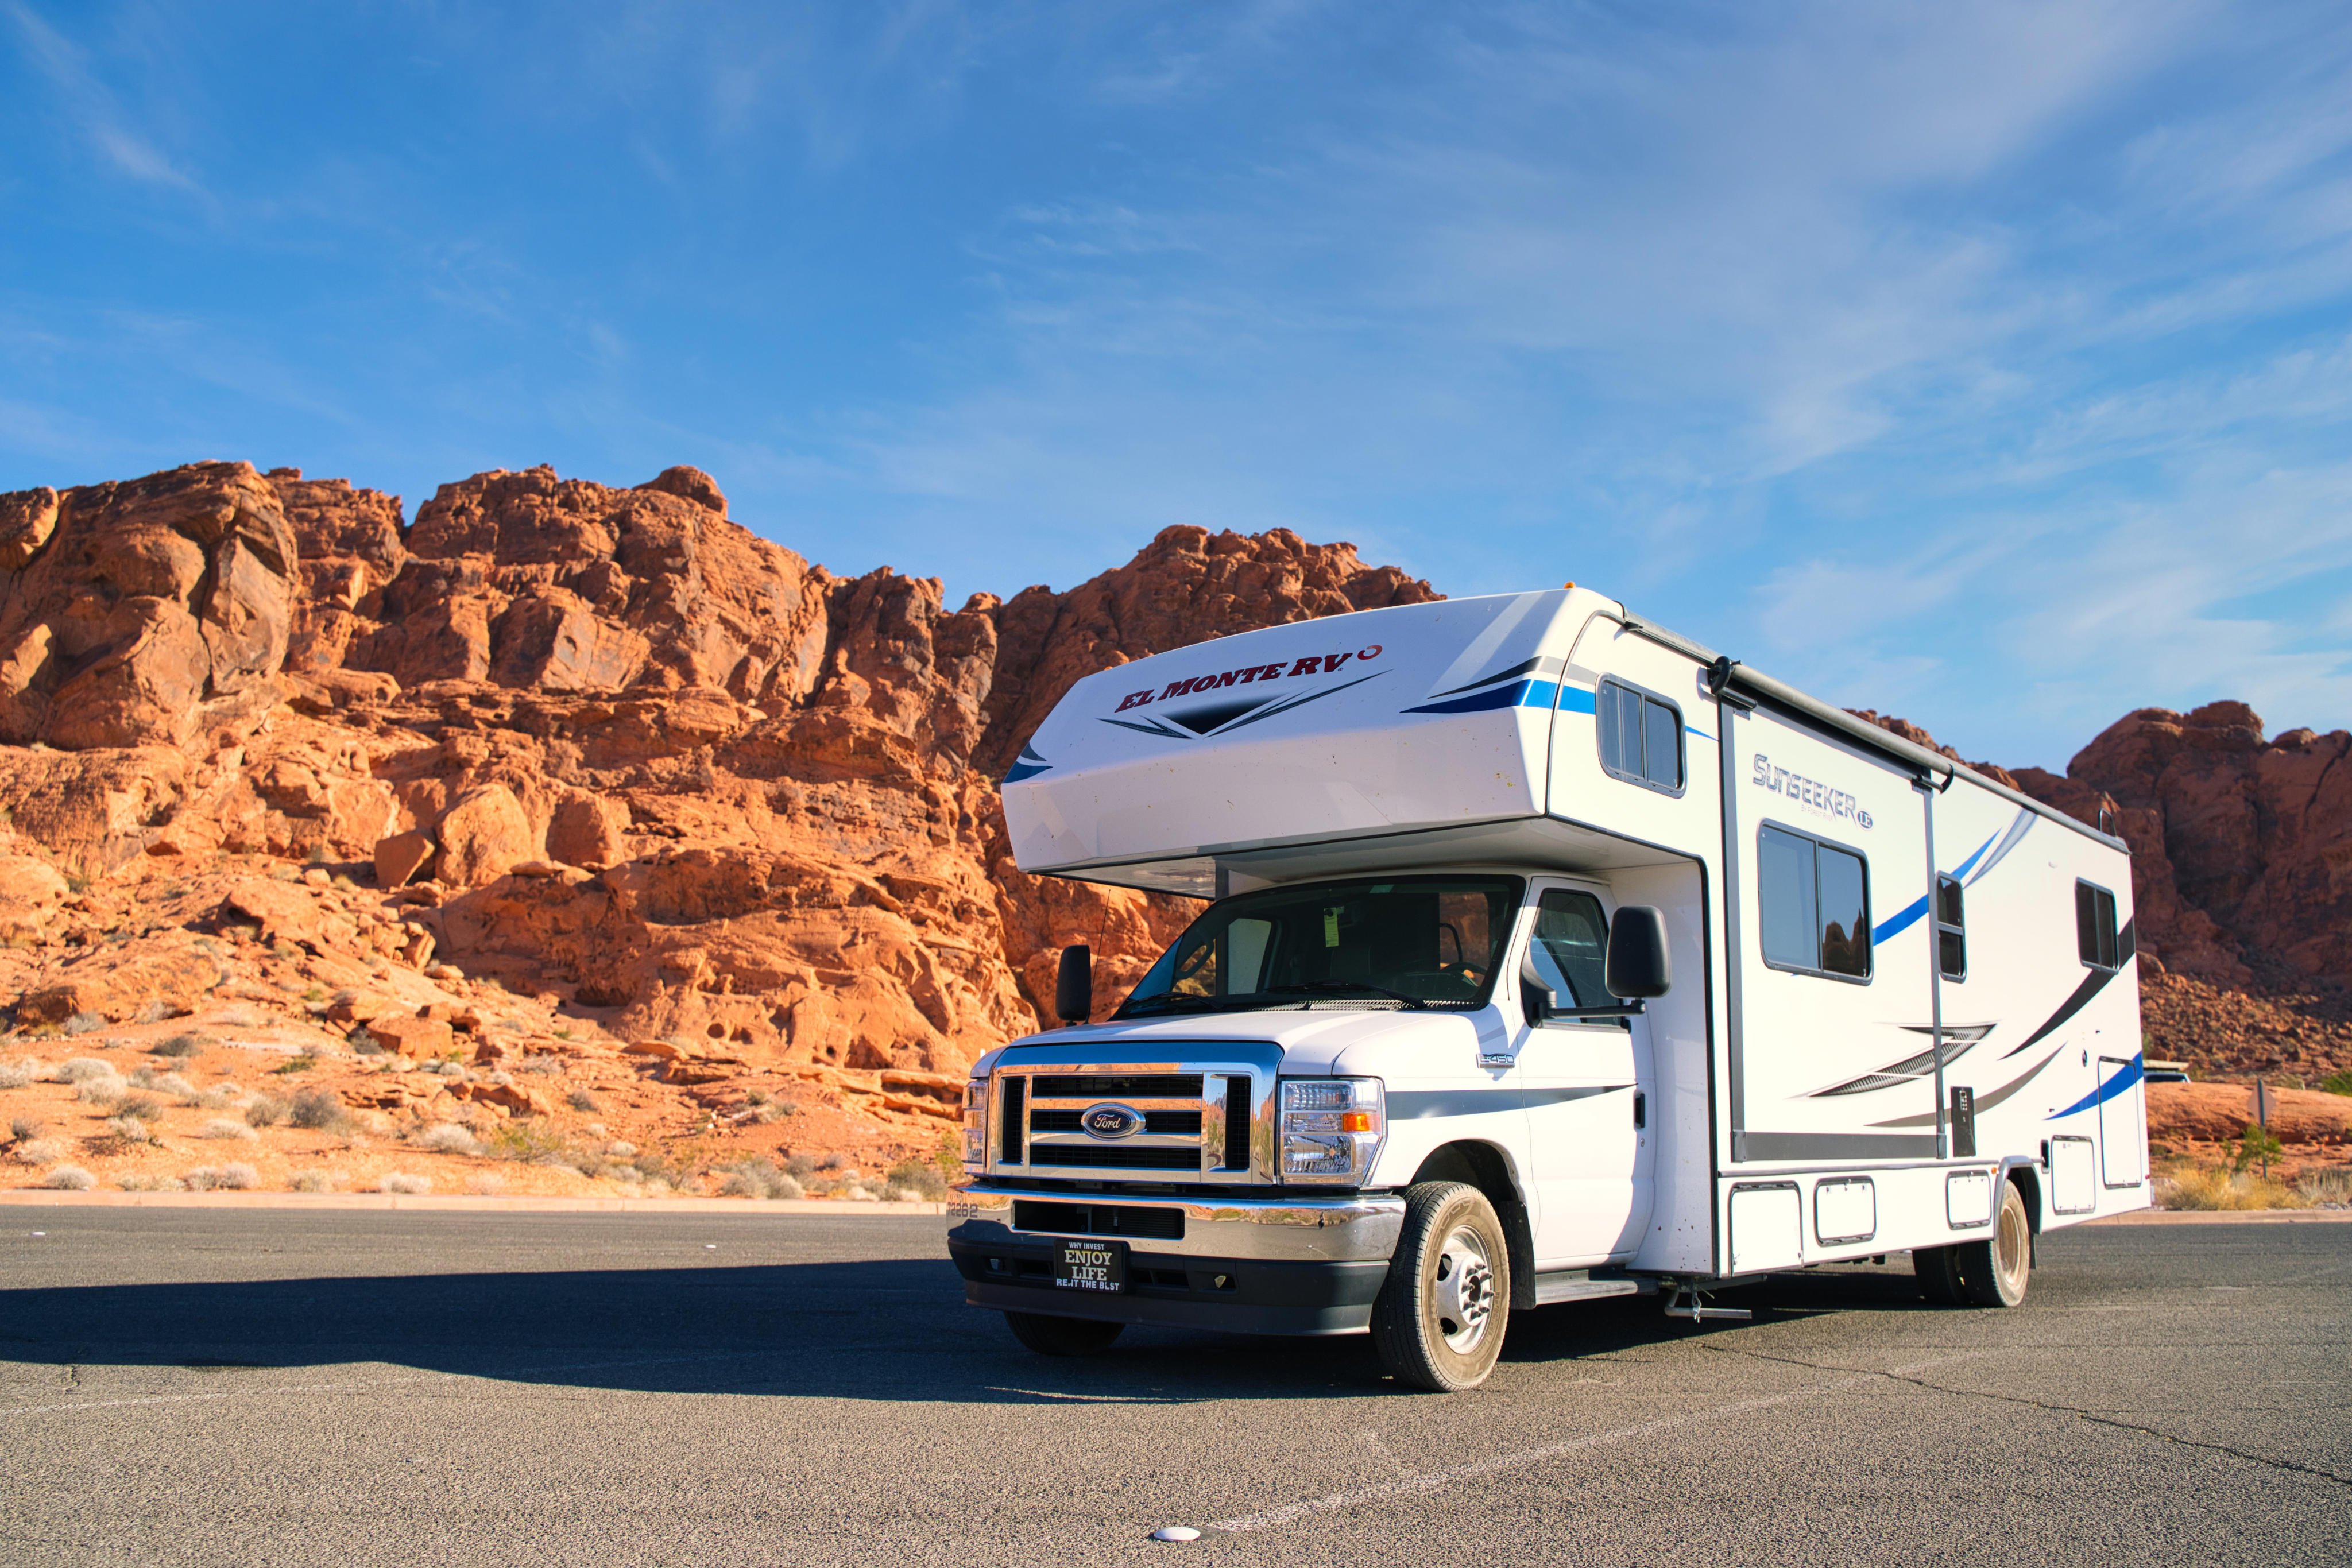 Why RV Expertise Matters – The Difference between Renting from El Monte RV vs. Private Party